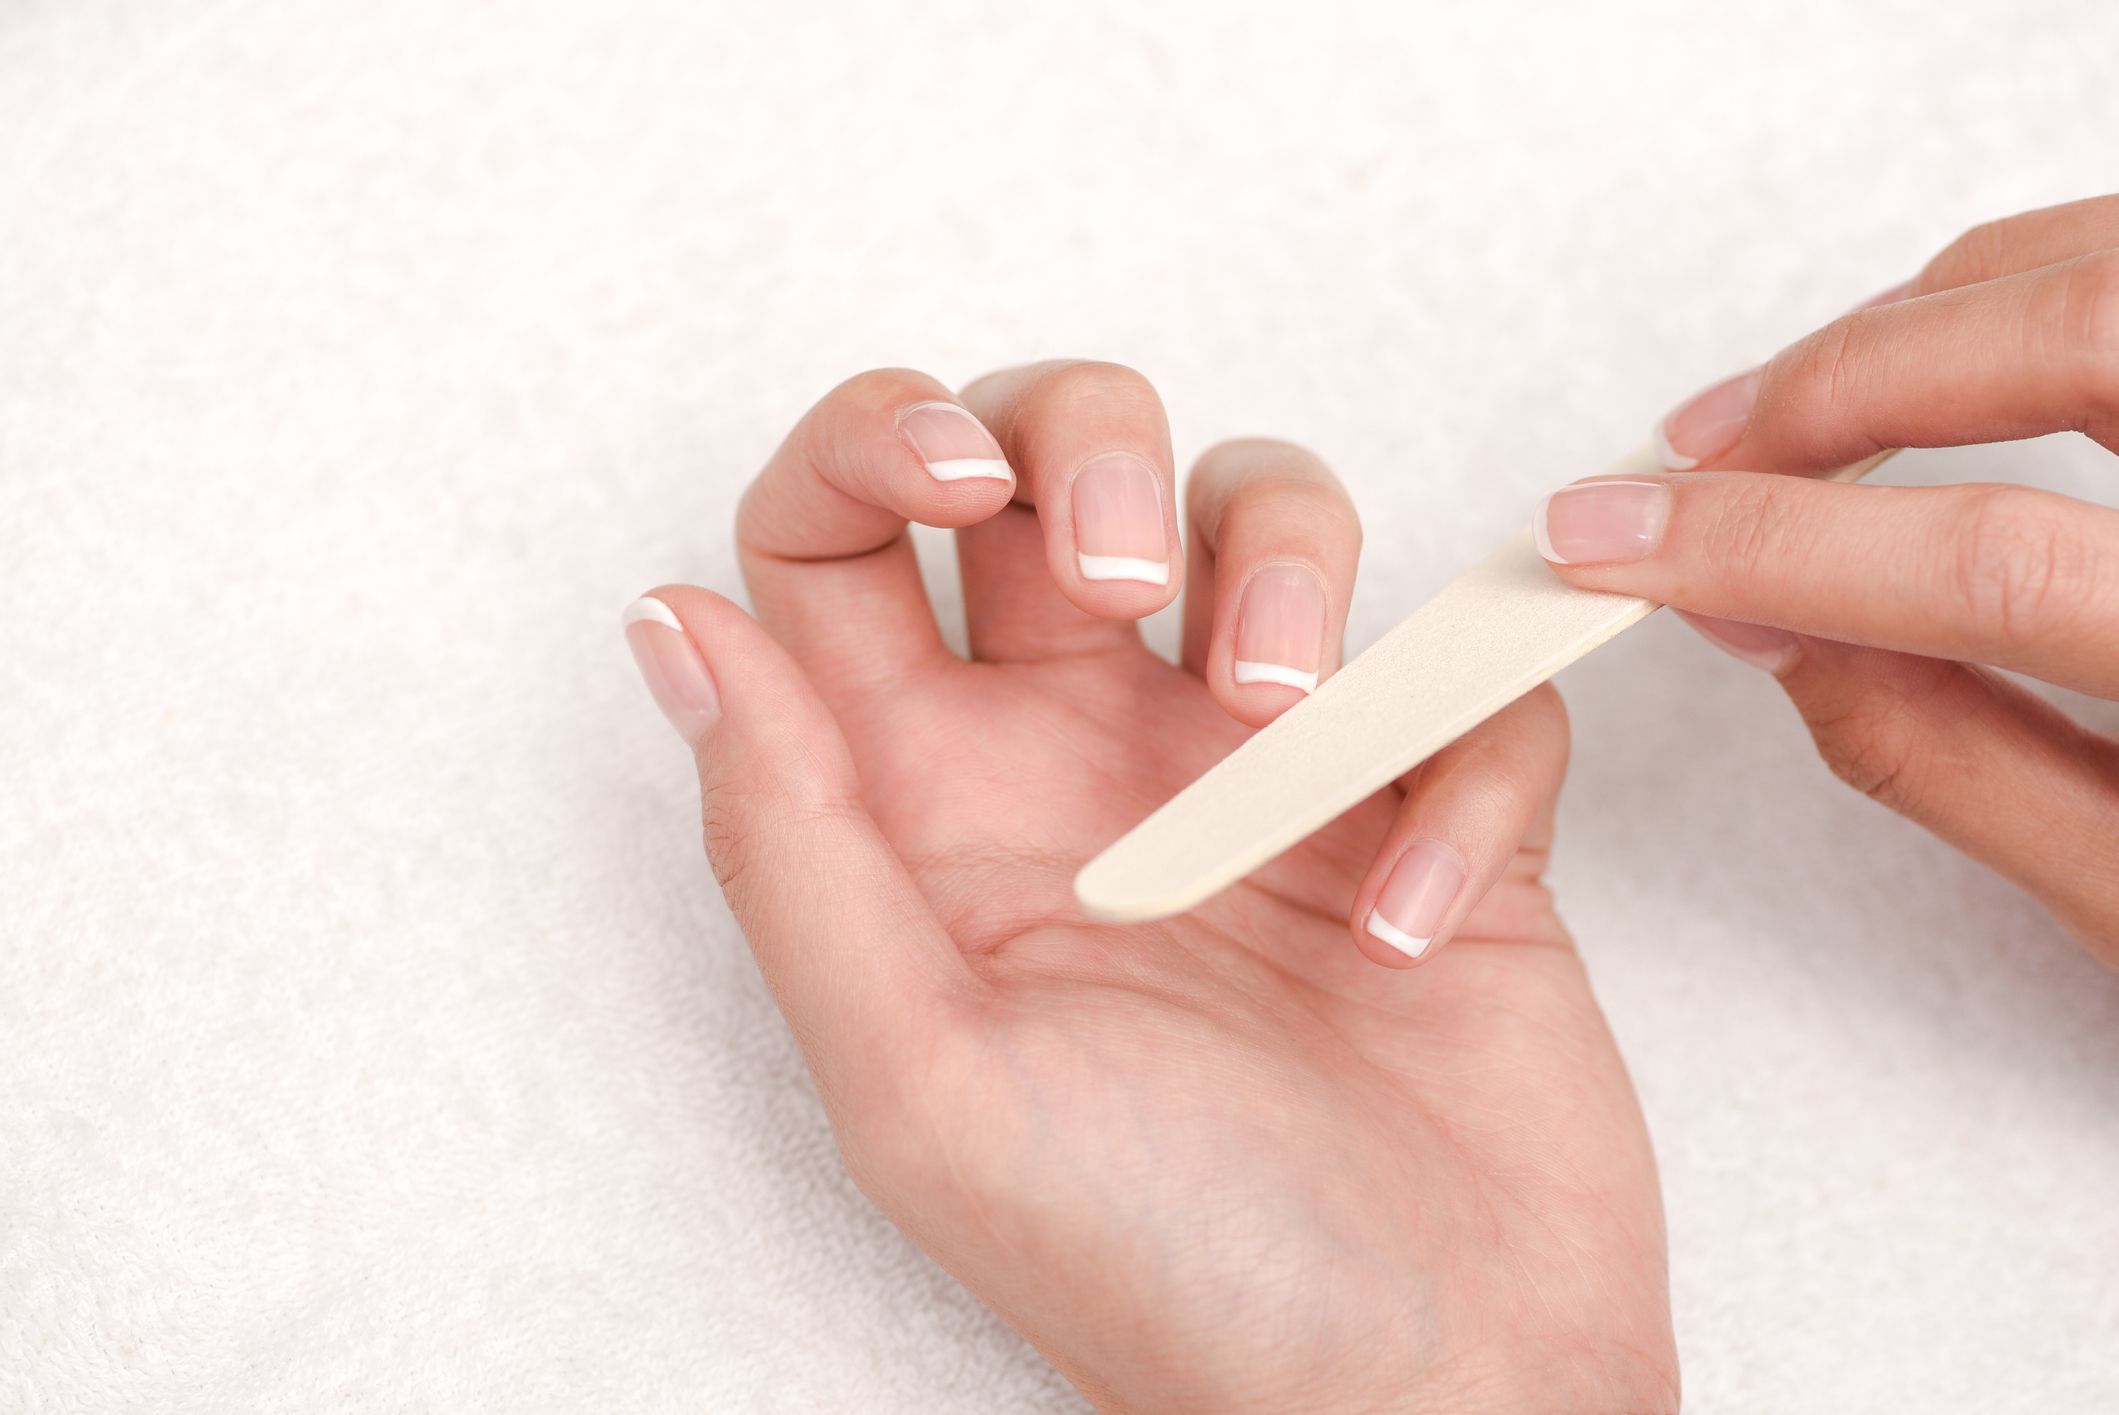 Home Remedies For Brittle Nails | SUGAR Cosmetics